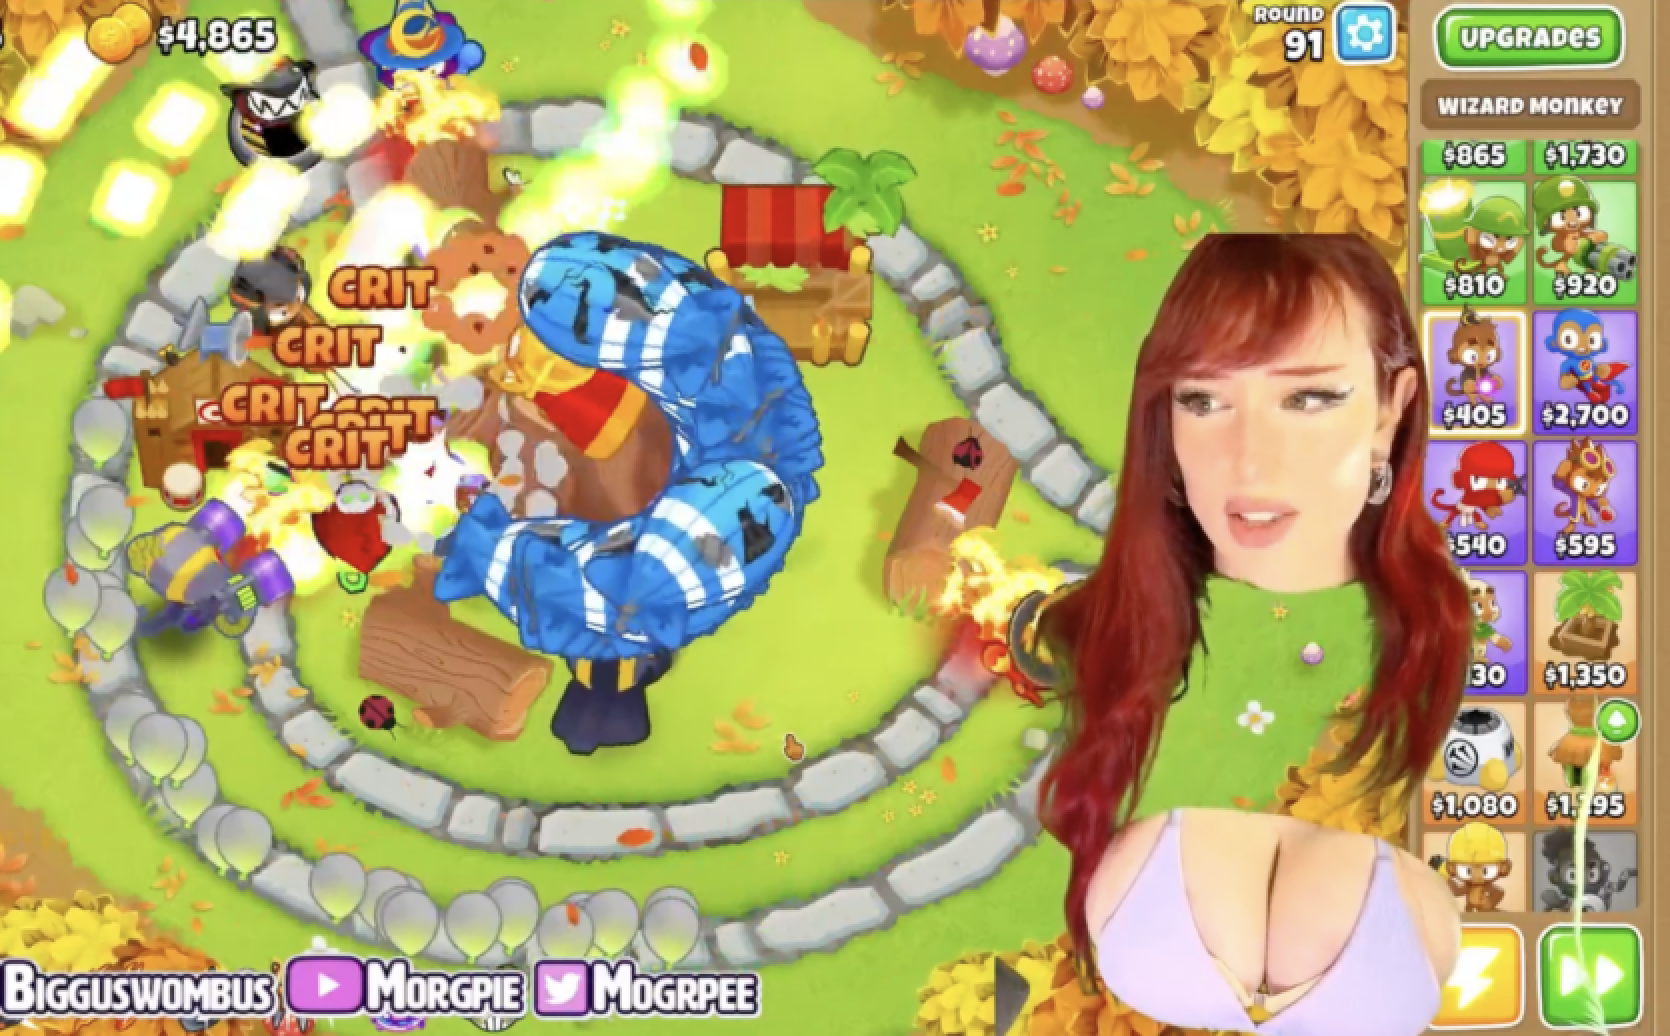 Twitch banned streaming gameplay to breasts and buttocks